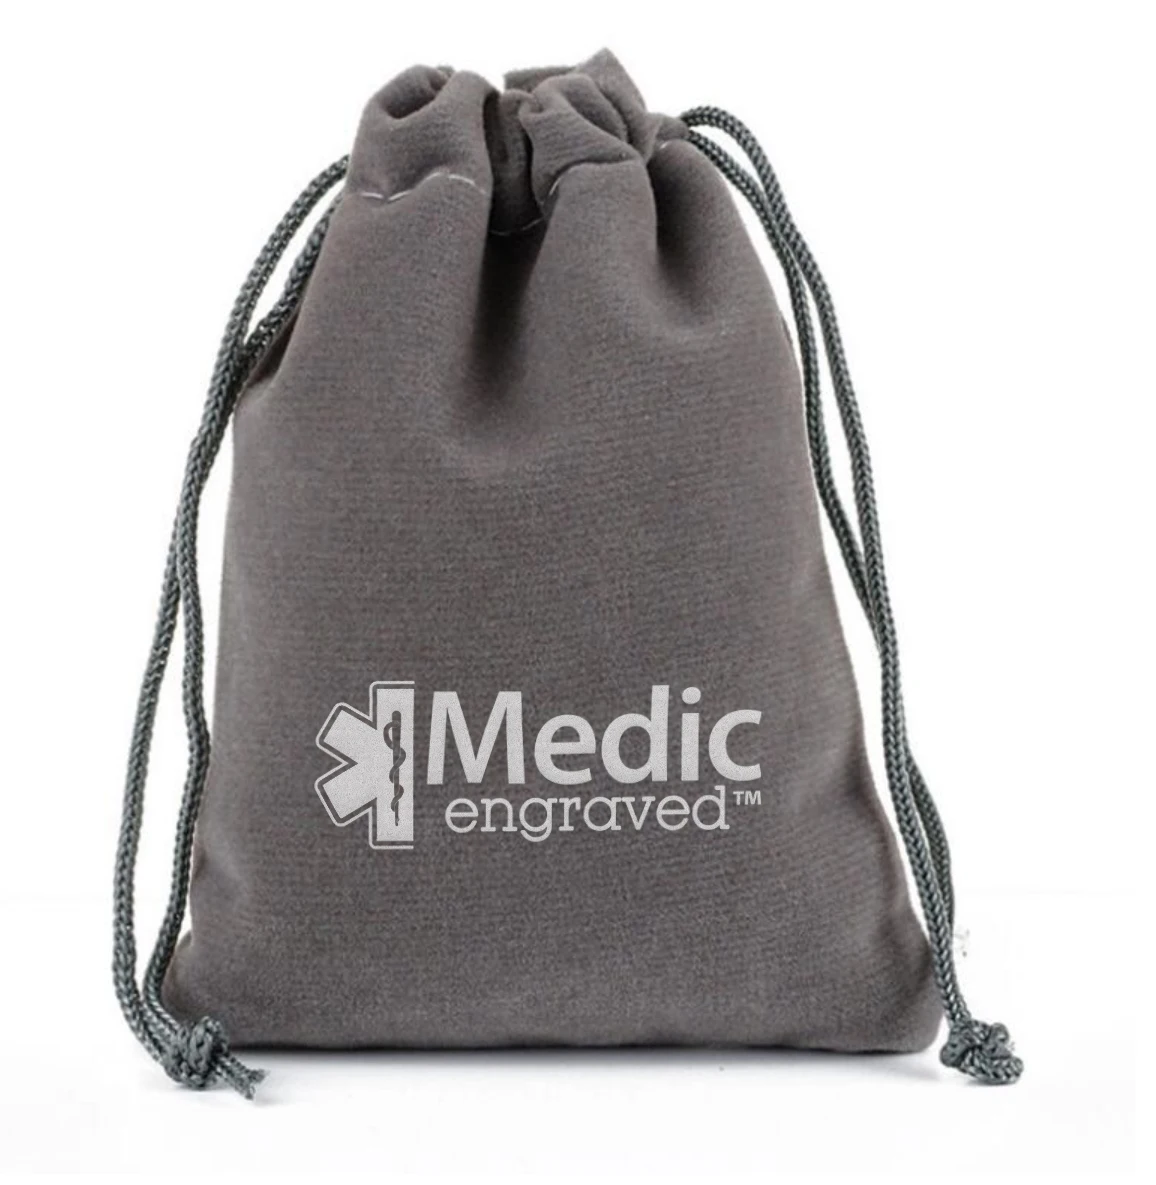 2000 PCS Customise Logo 8x10cm Grey Velvet Bags Drawstrings Gift Pouches Printed With White Logo (On the Centre) 2000 pieces customised logo 8x5cm grey color silver polishing cloth stamped with embossed logo packed separately